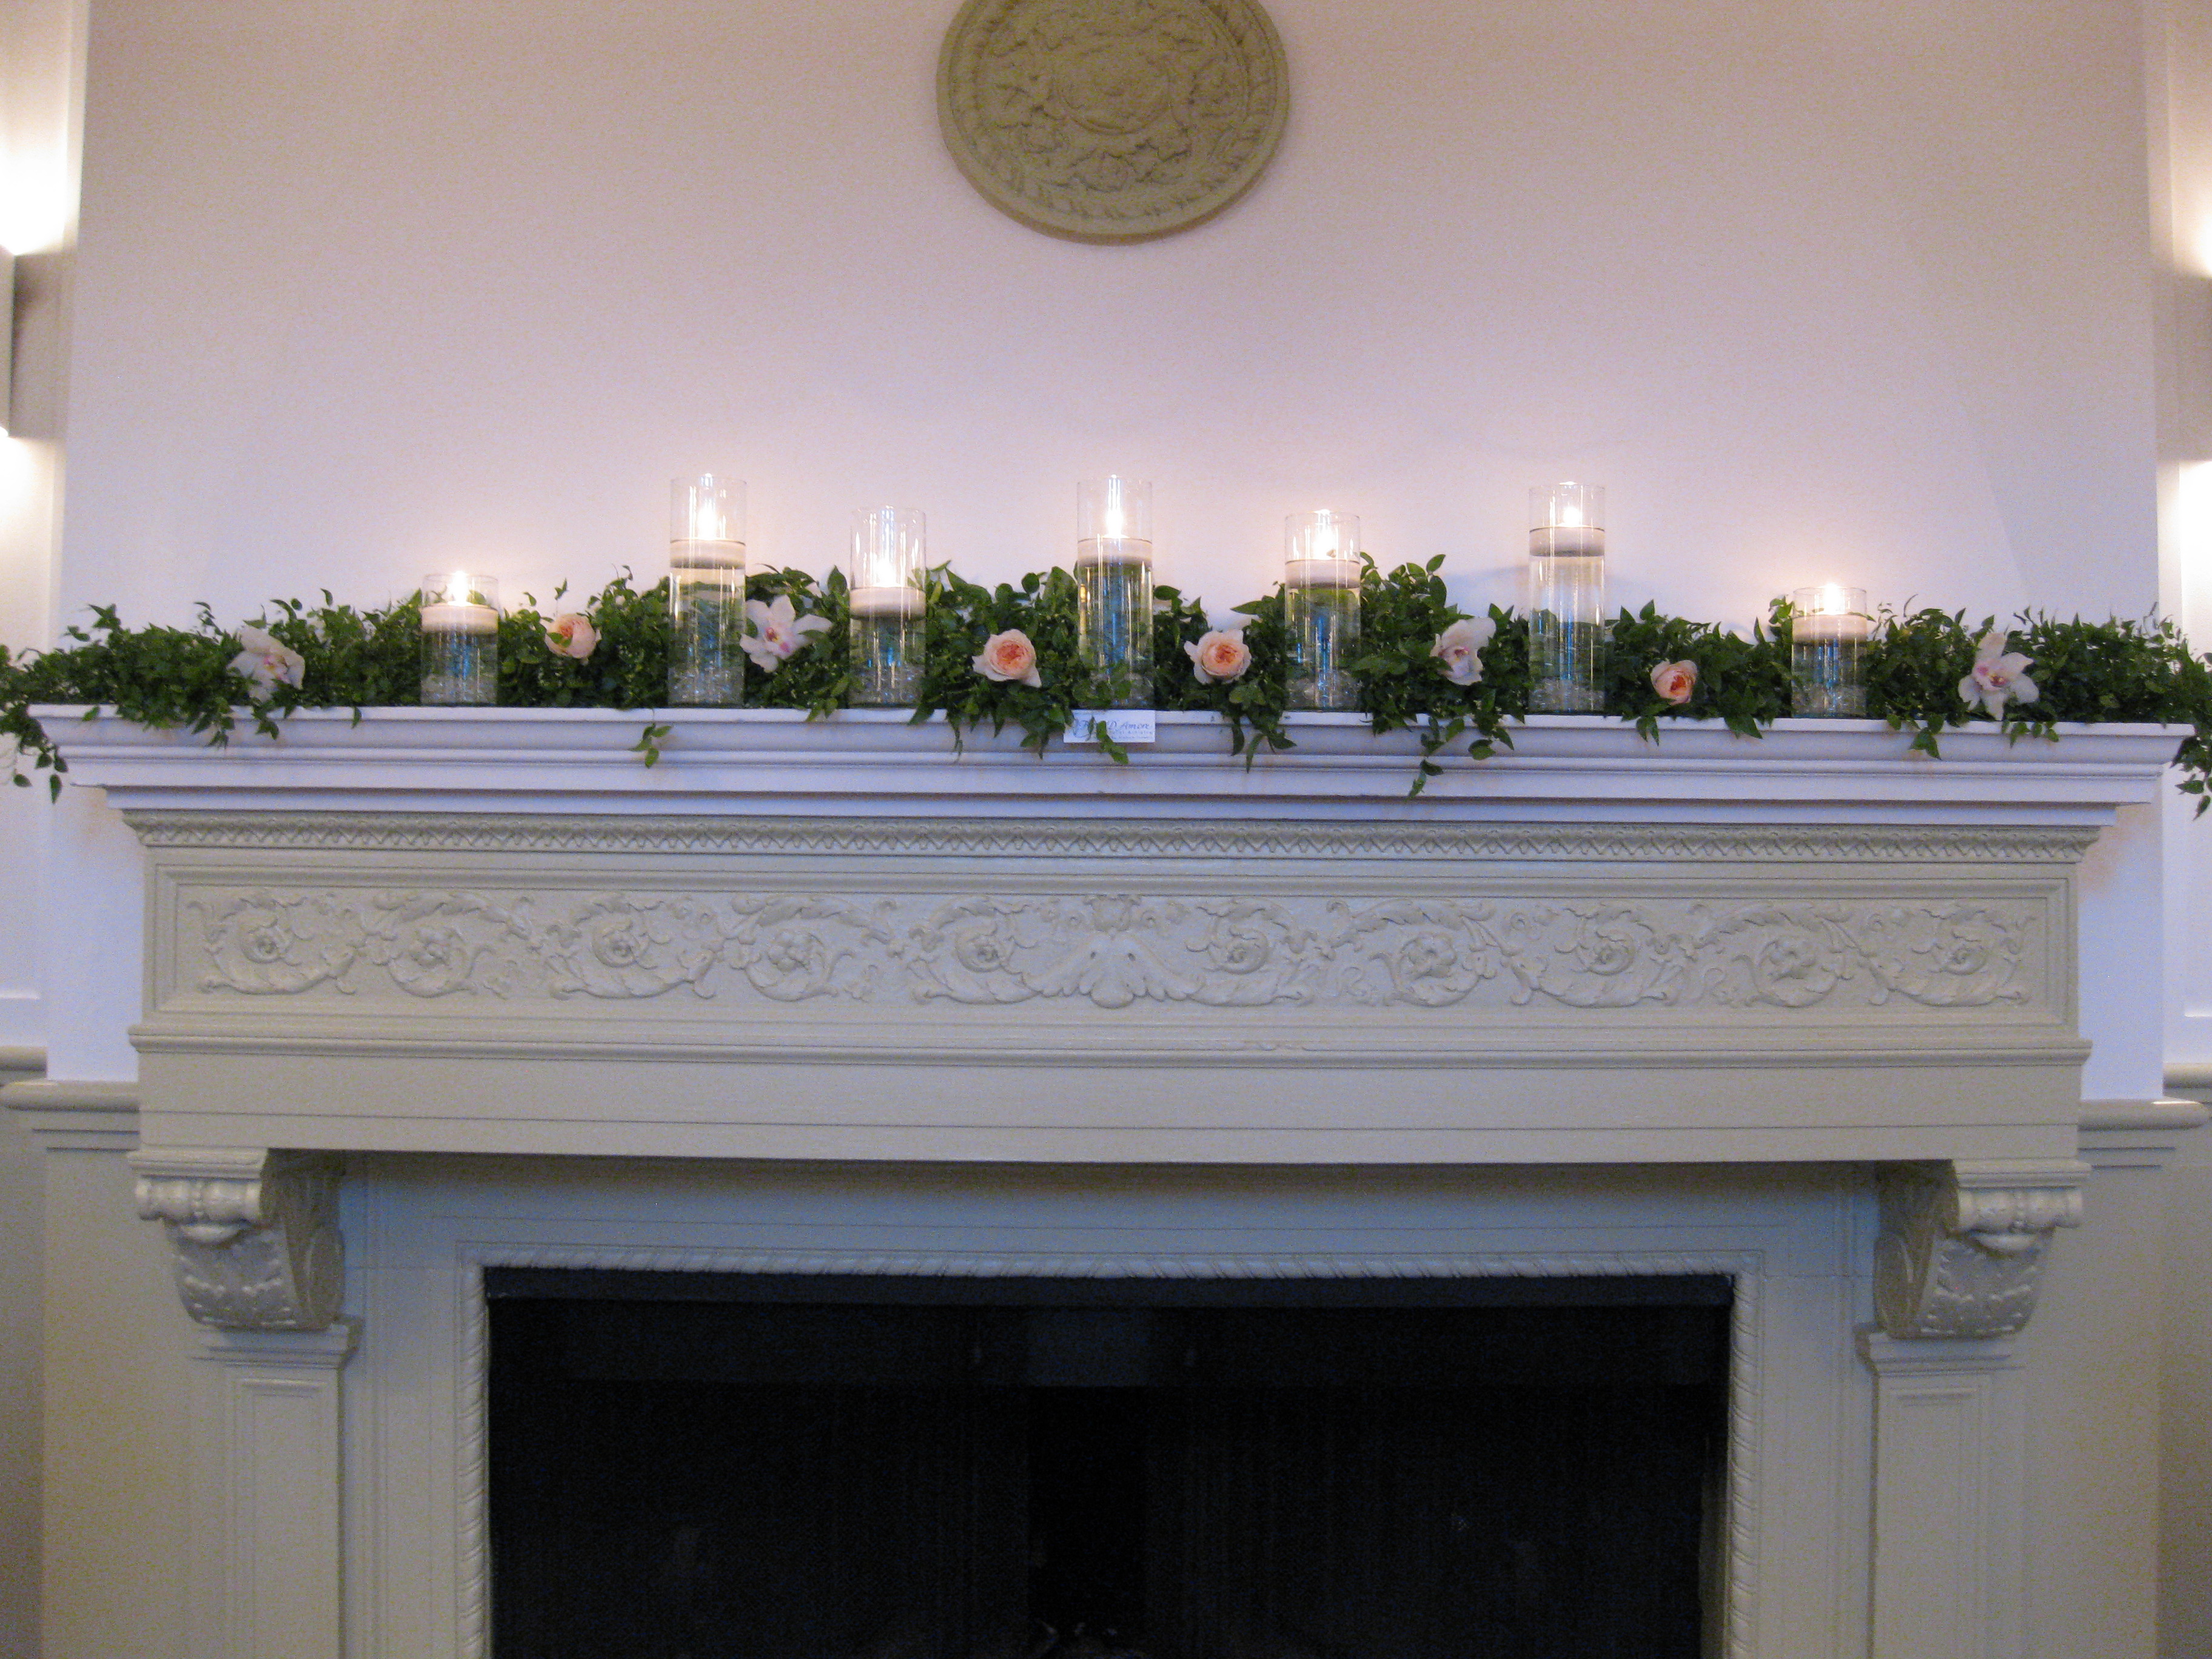 mantle greens, flowers, and candles